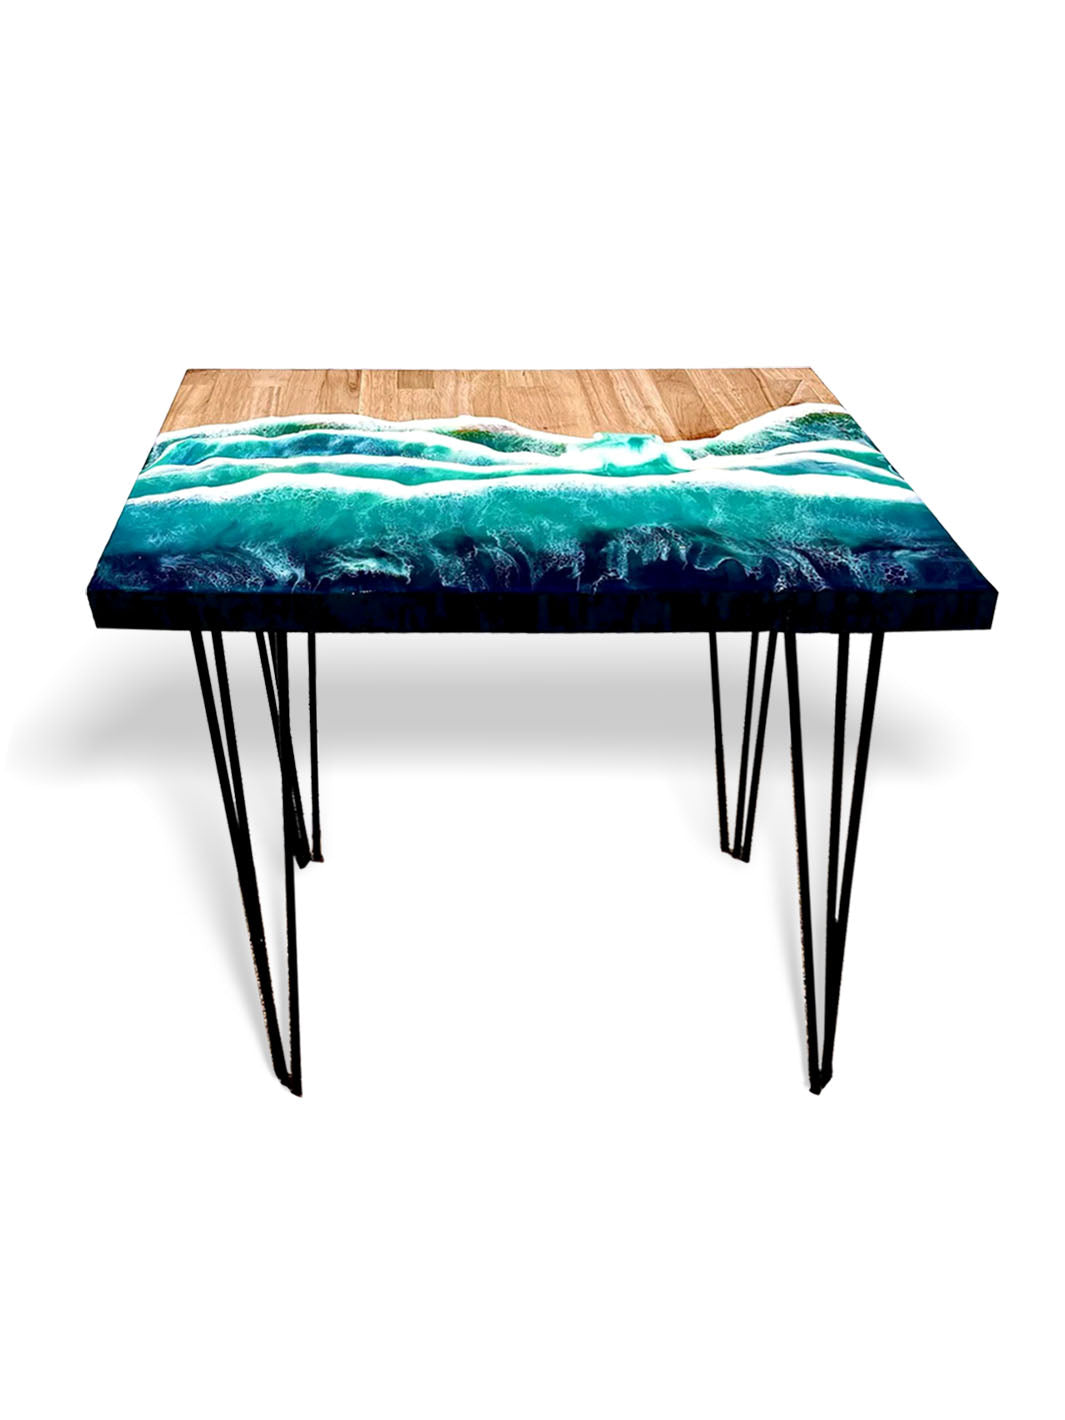 Handcrafted Beach Inspired Elongated Epoxy Resin Hevea Wood Table | 25â€Lx15â€W Artsheedal Tables ART0147